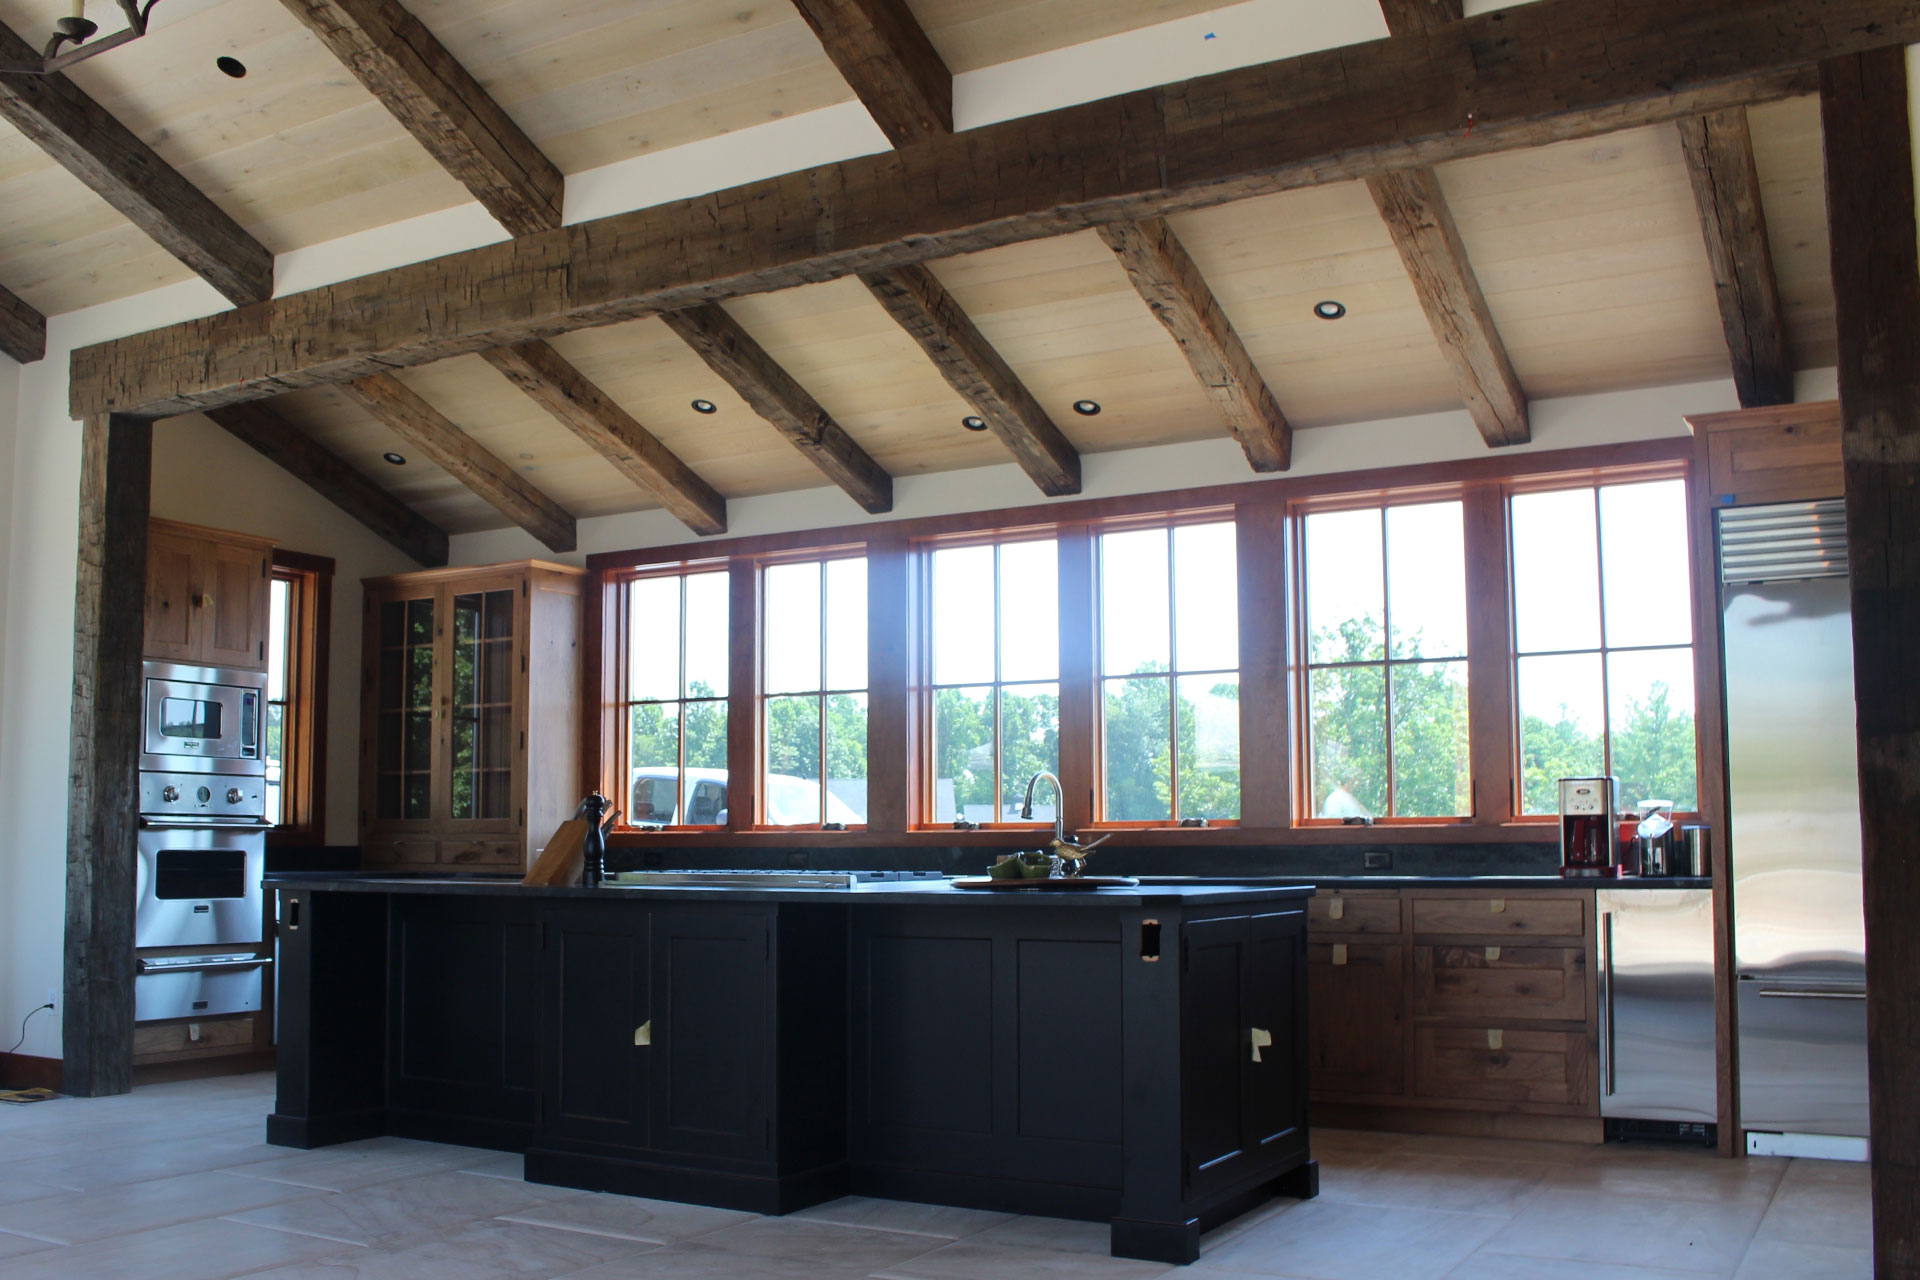 Reclaimed Beams Riverbend Kitchen 2